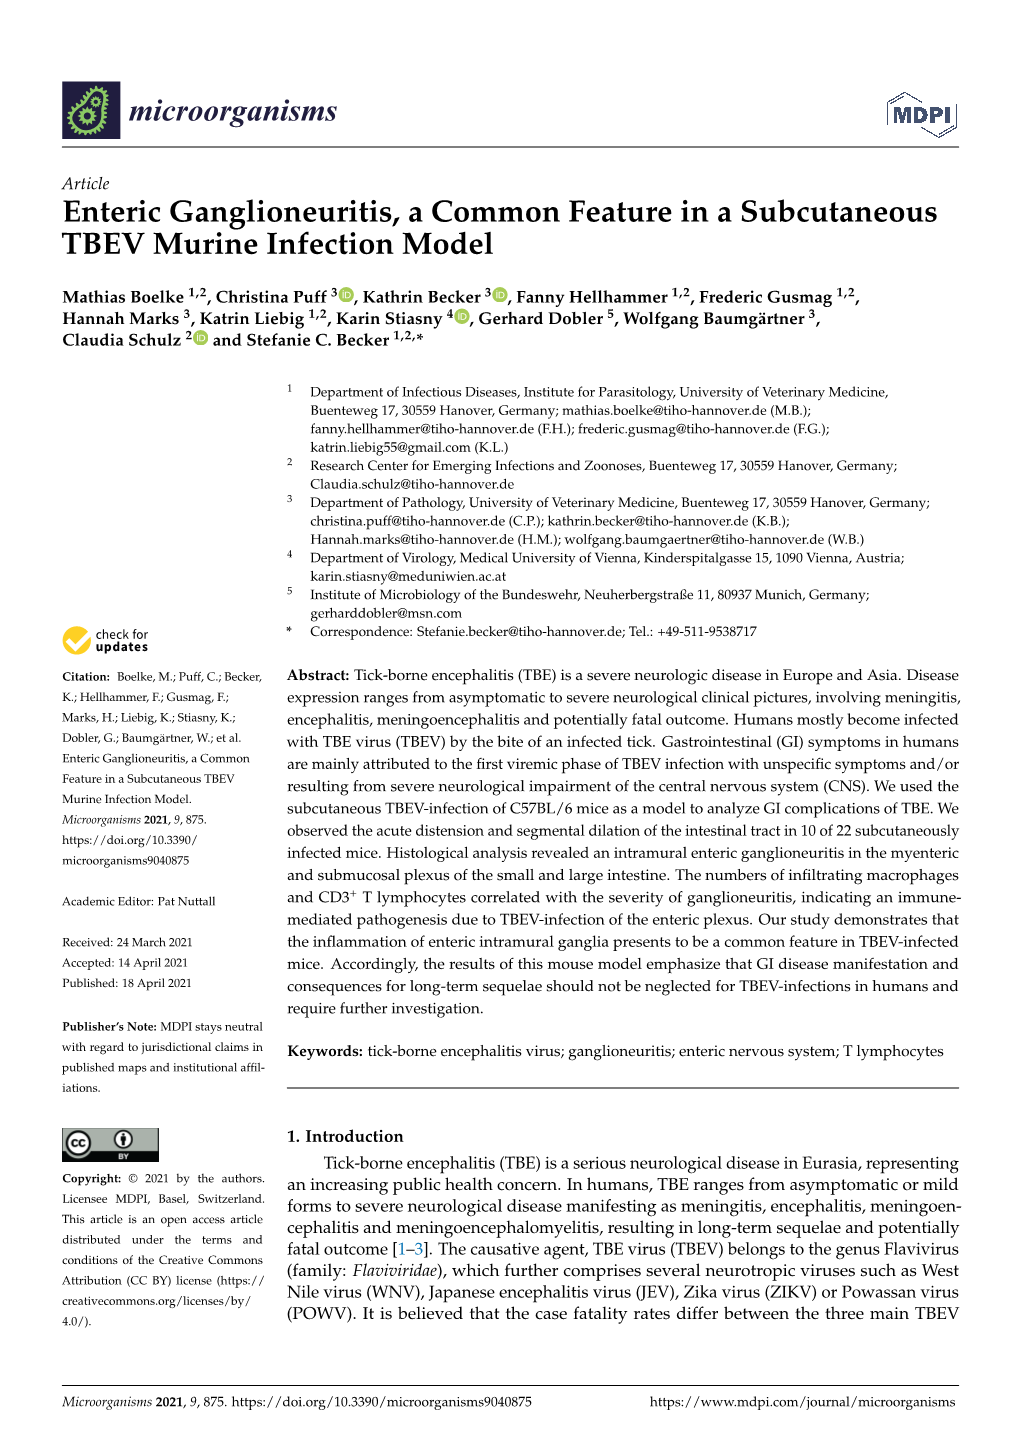 Enteric Ganglioneuritis, a Common Feature in a Subcutaneous TBEV Murine Infection Model